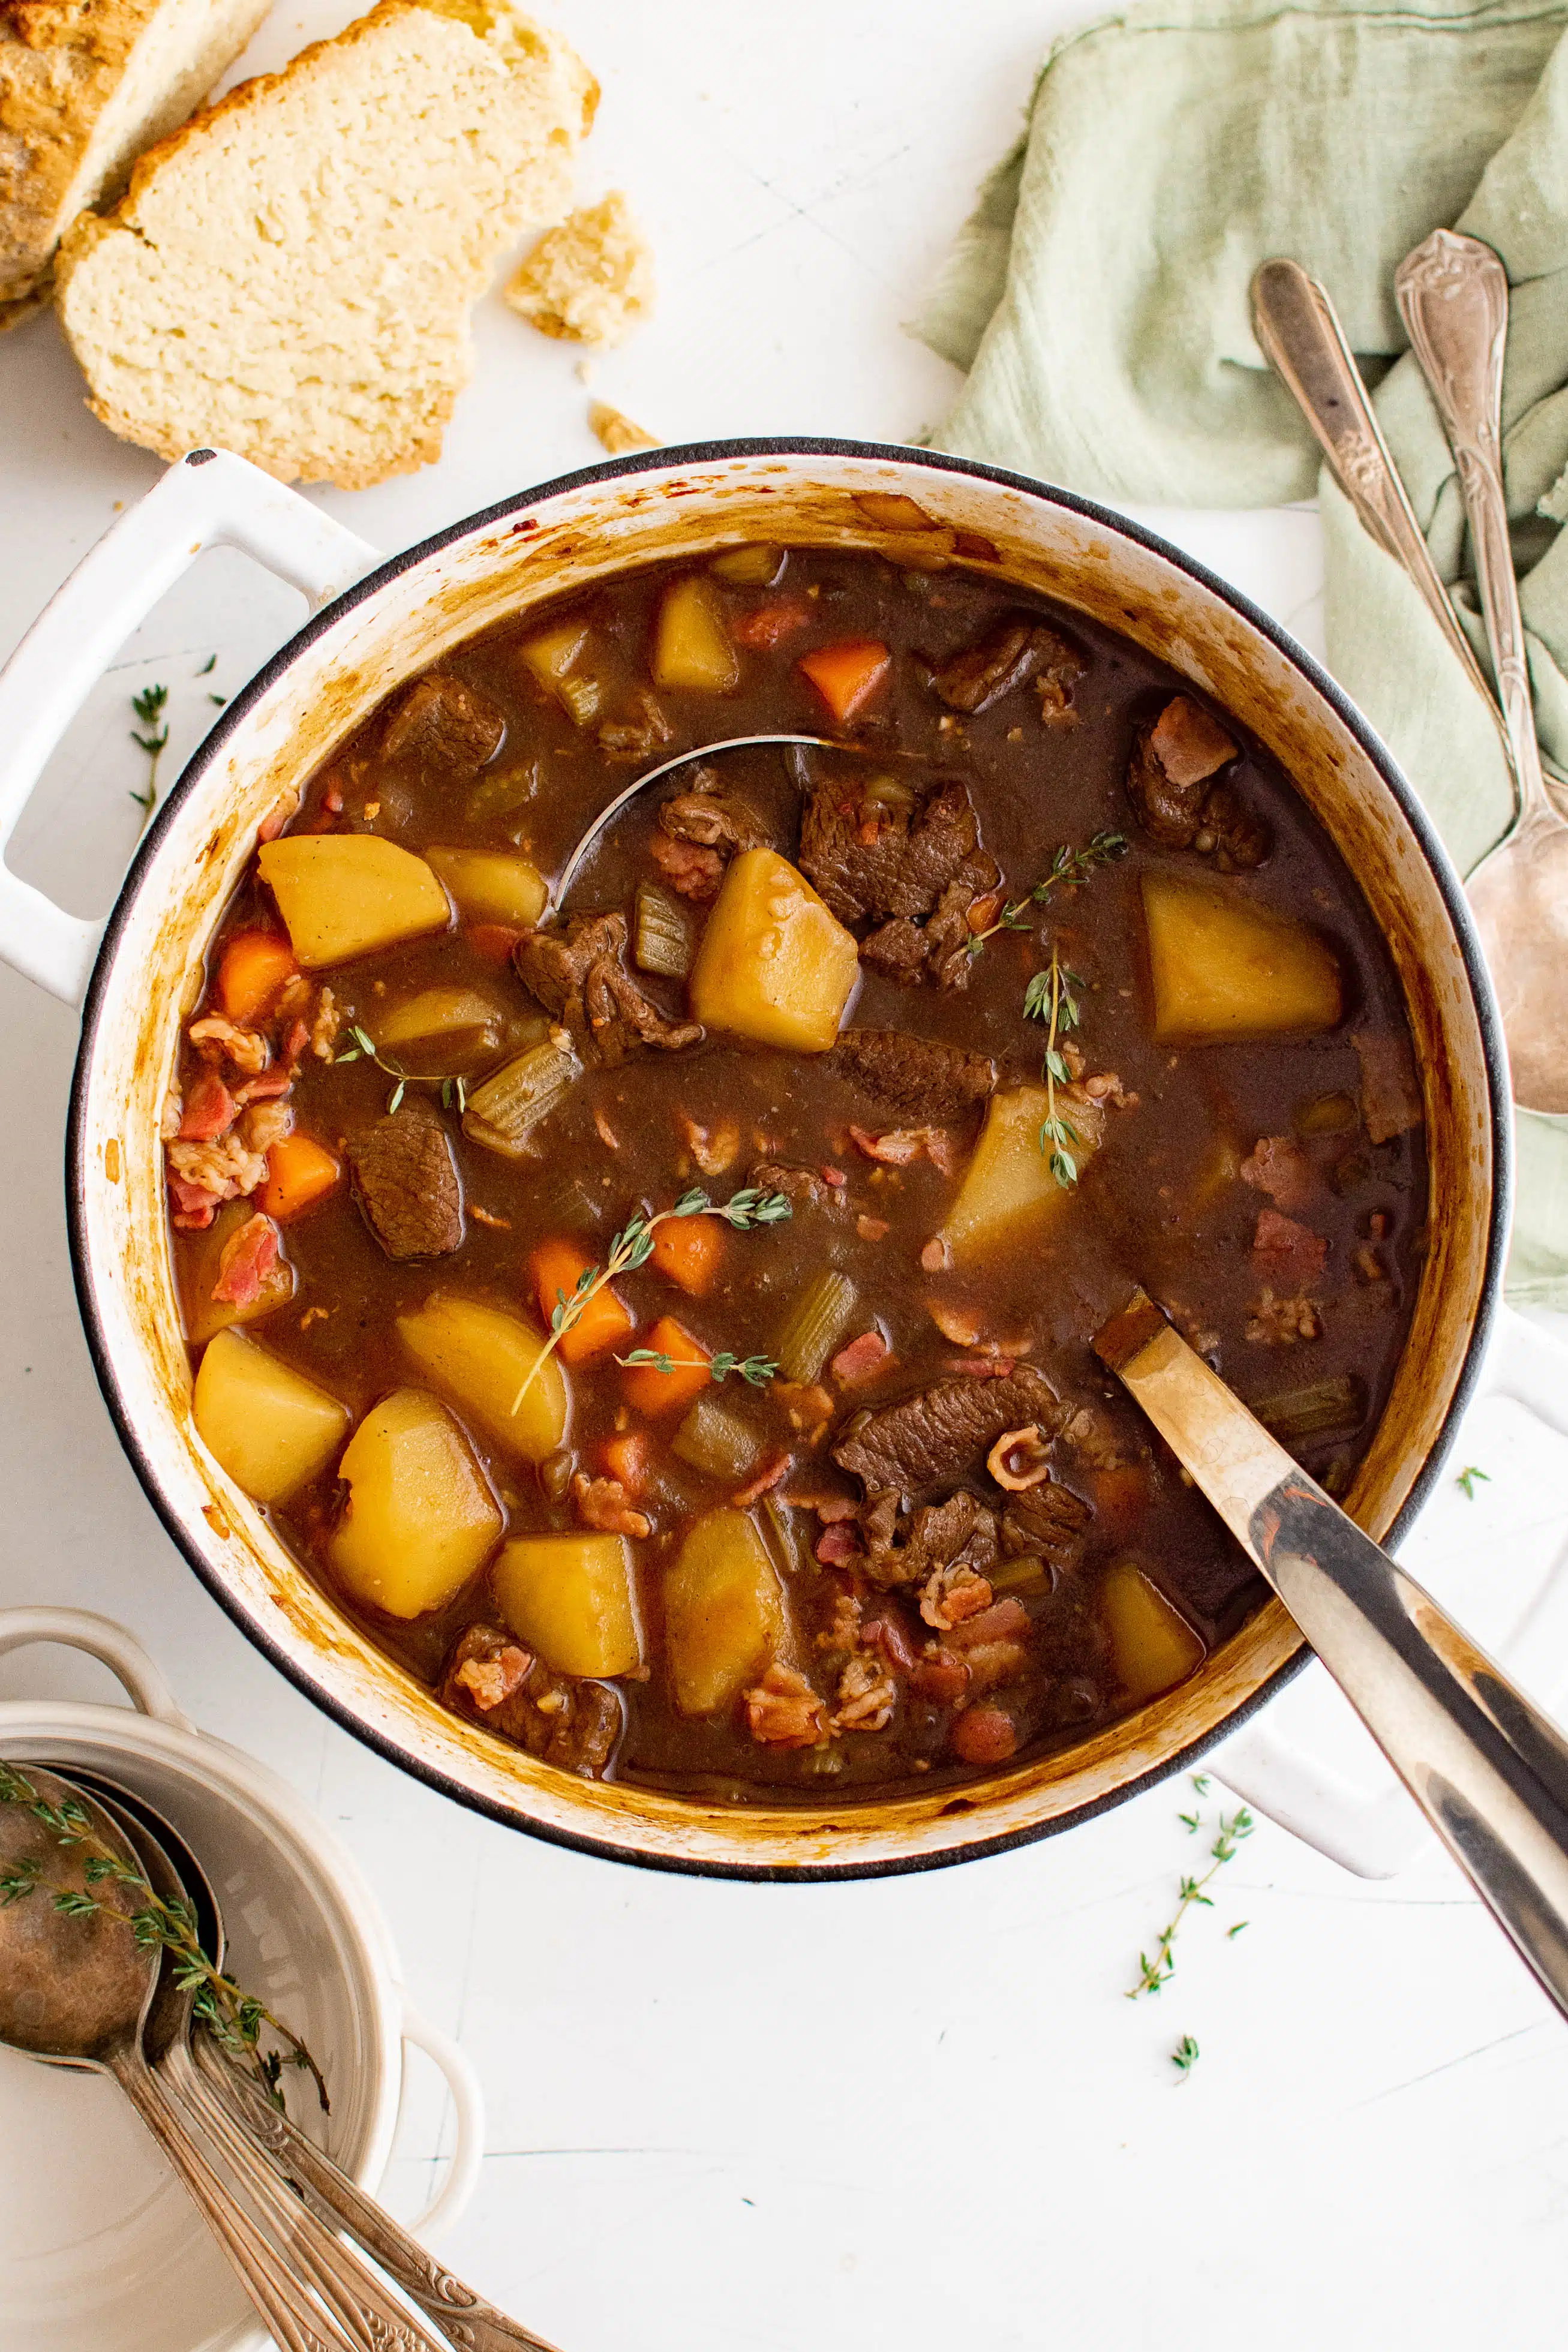 Large soup pot filled with Guinness beef stew filled with chunks of beef, potatoes, carrots, and garnished with fresh thyme.